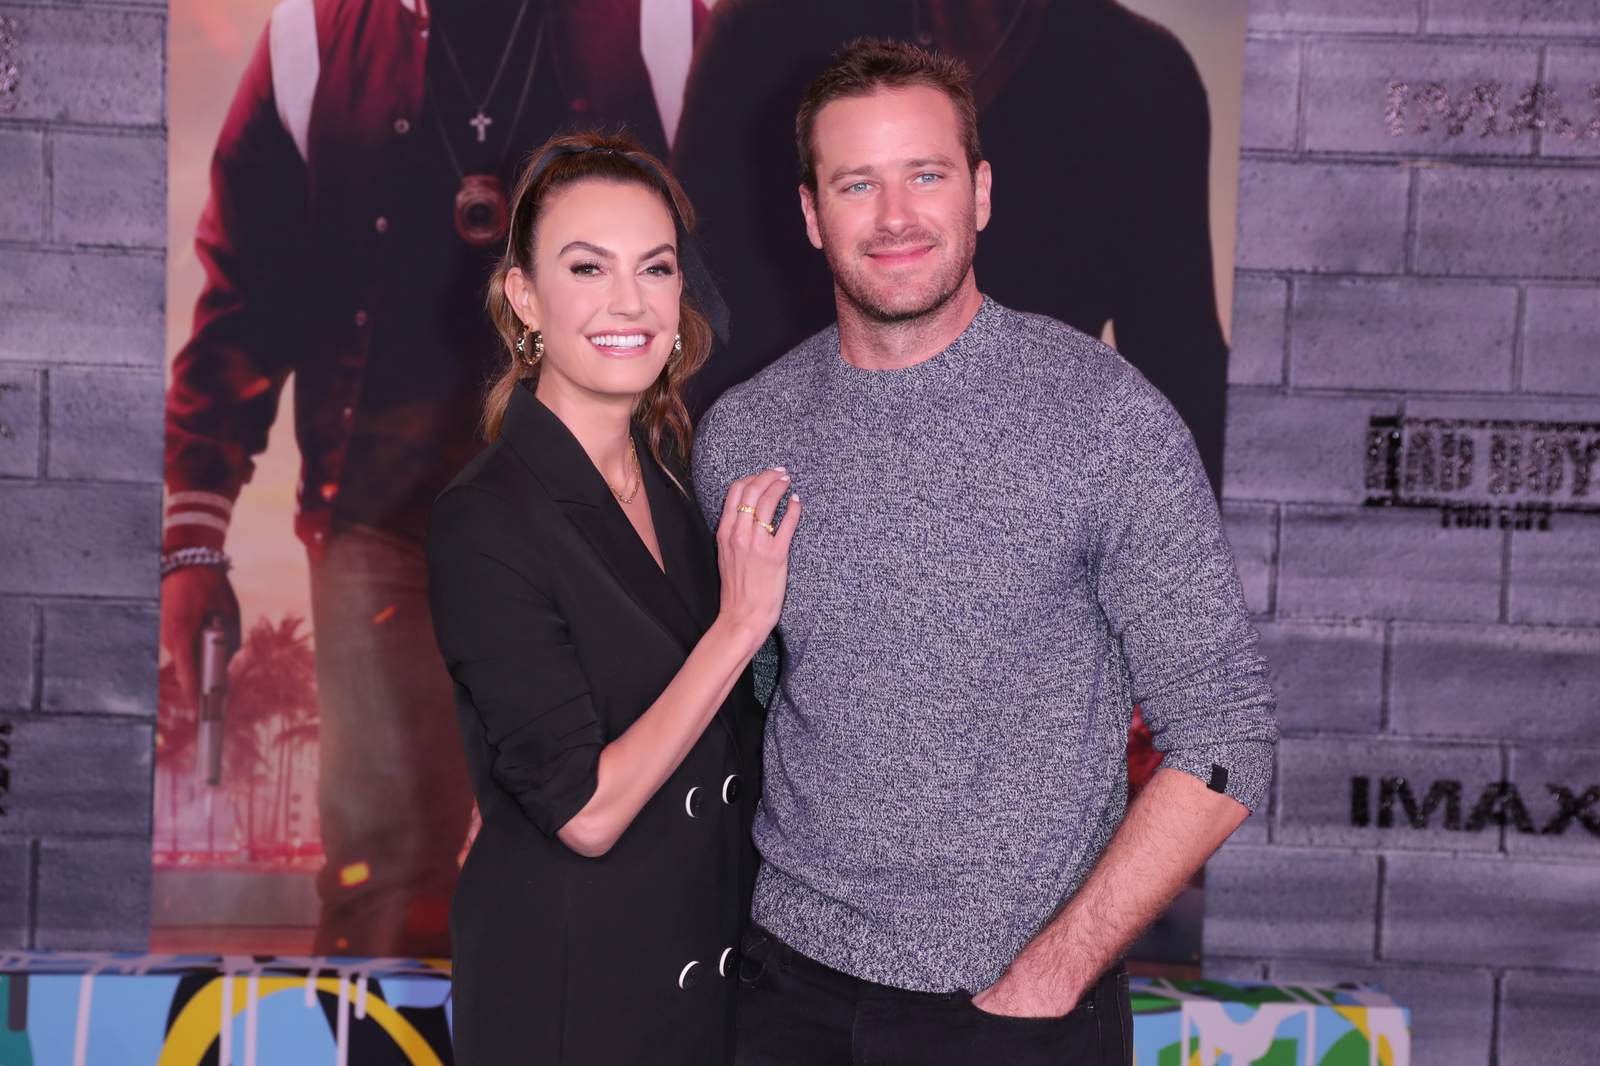 BIRD Bakery owner Elizabeth Chambers, actor Armie Hammer splitting up after 10 years of marriage